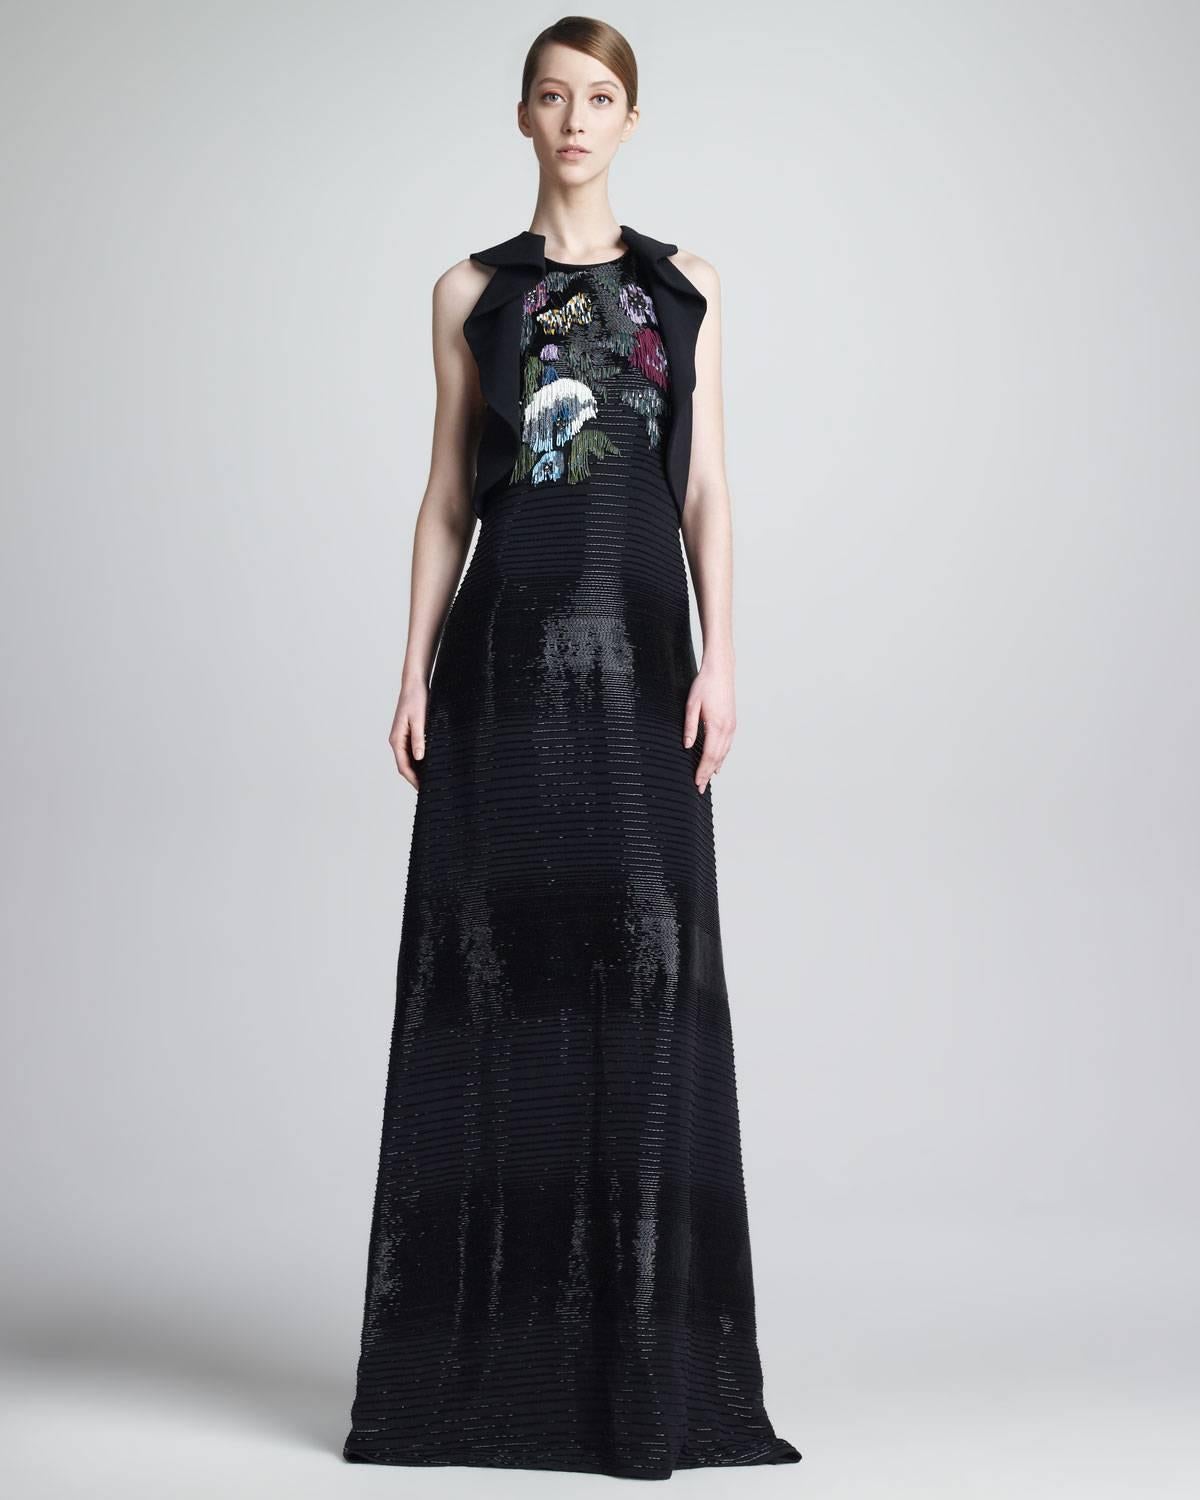 New ETRO FULLY BEADED BLACK GOWN 2